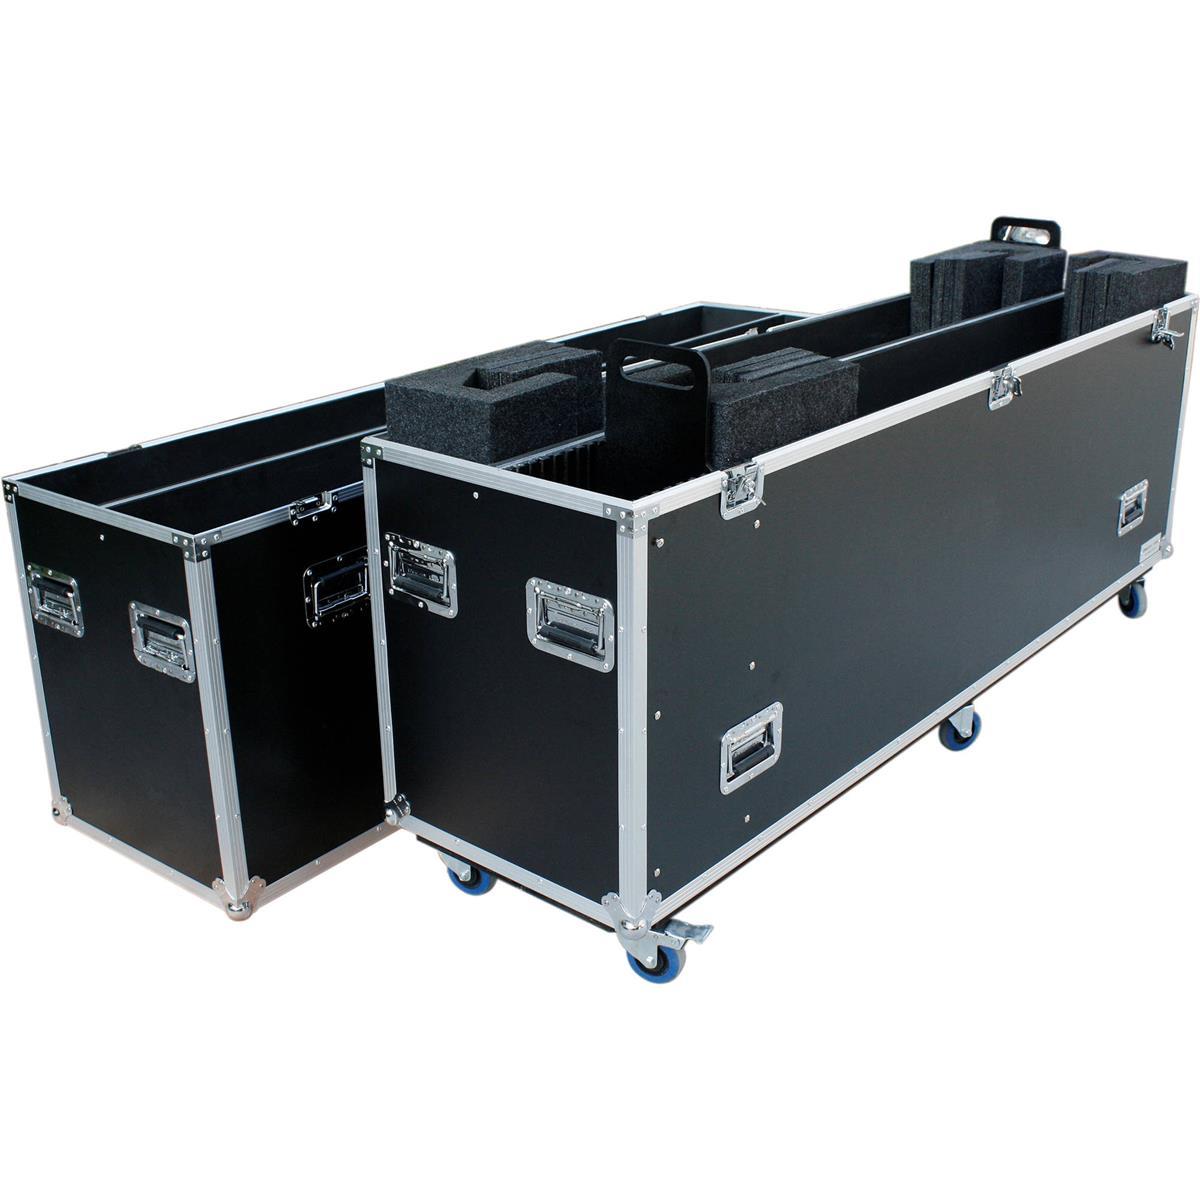 Image of Deejay LED Deejay Hard Fly Drive LED Case for Two 80&quot; or 90&quot; LED / Plasma TVs or Monitors